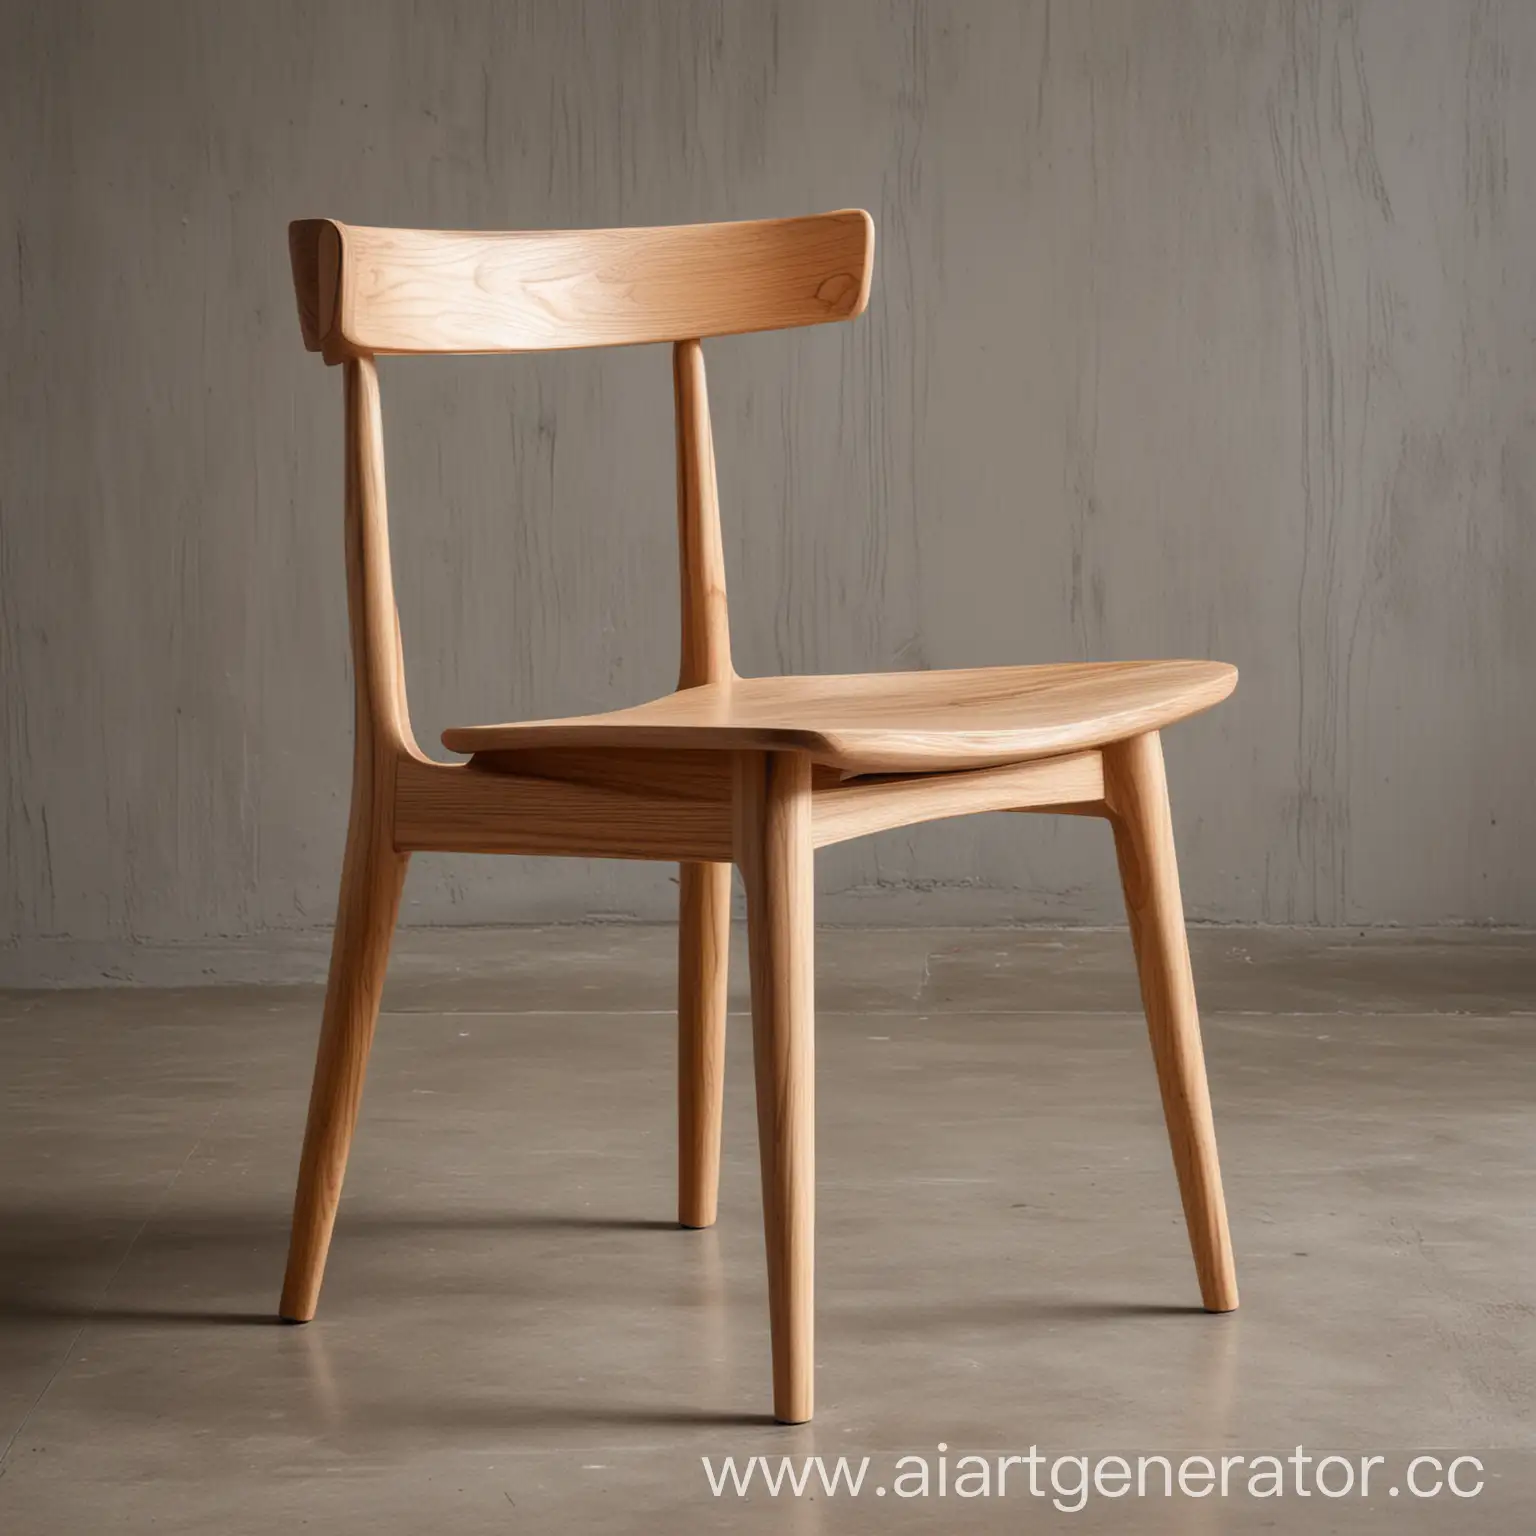 Contemporary-Wooden-Dining-Chair-with-Minimalist-Design